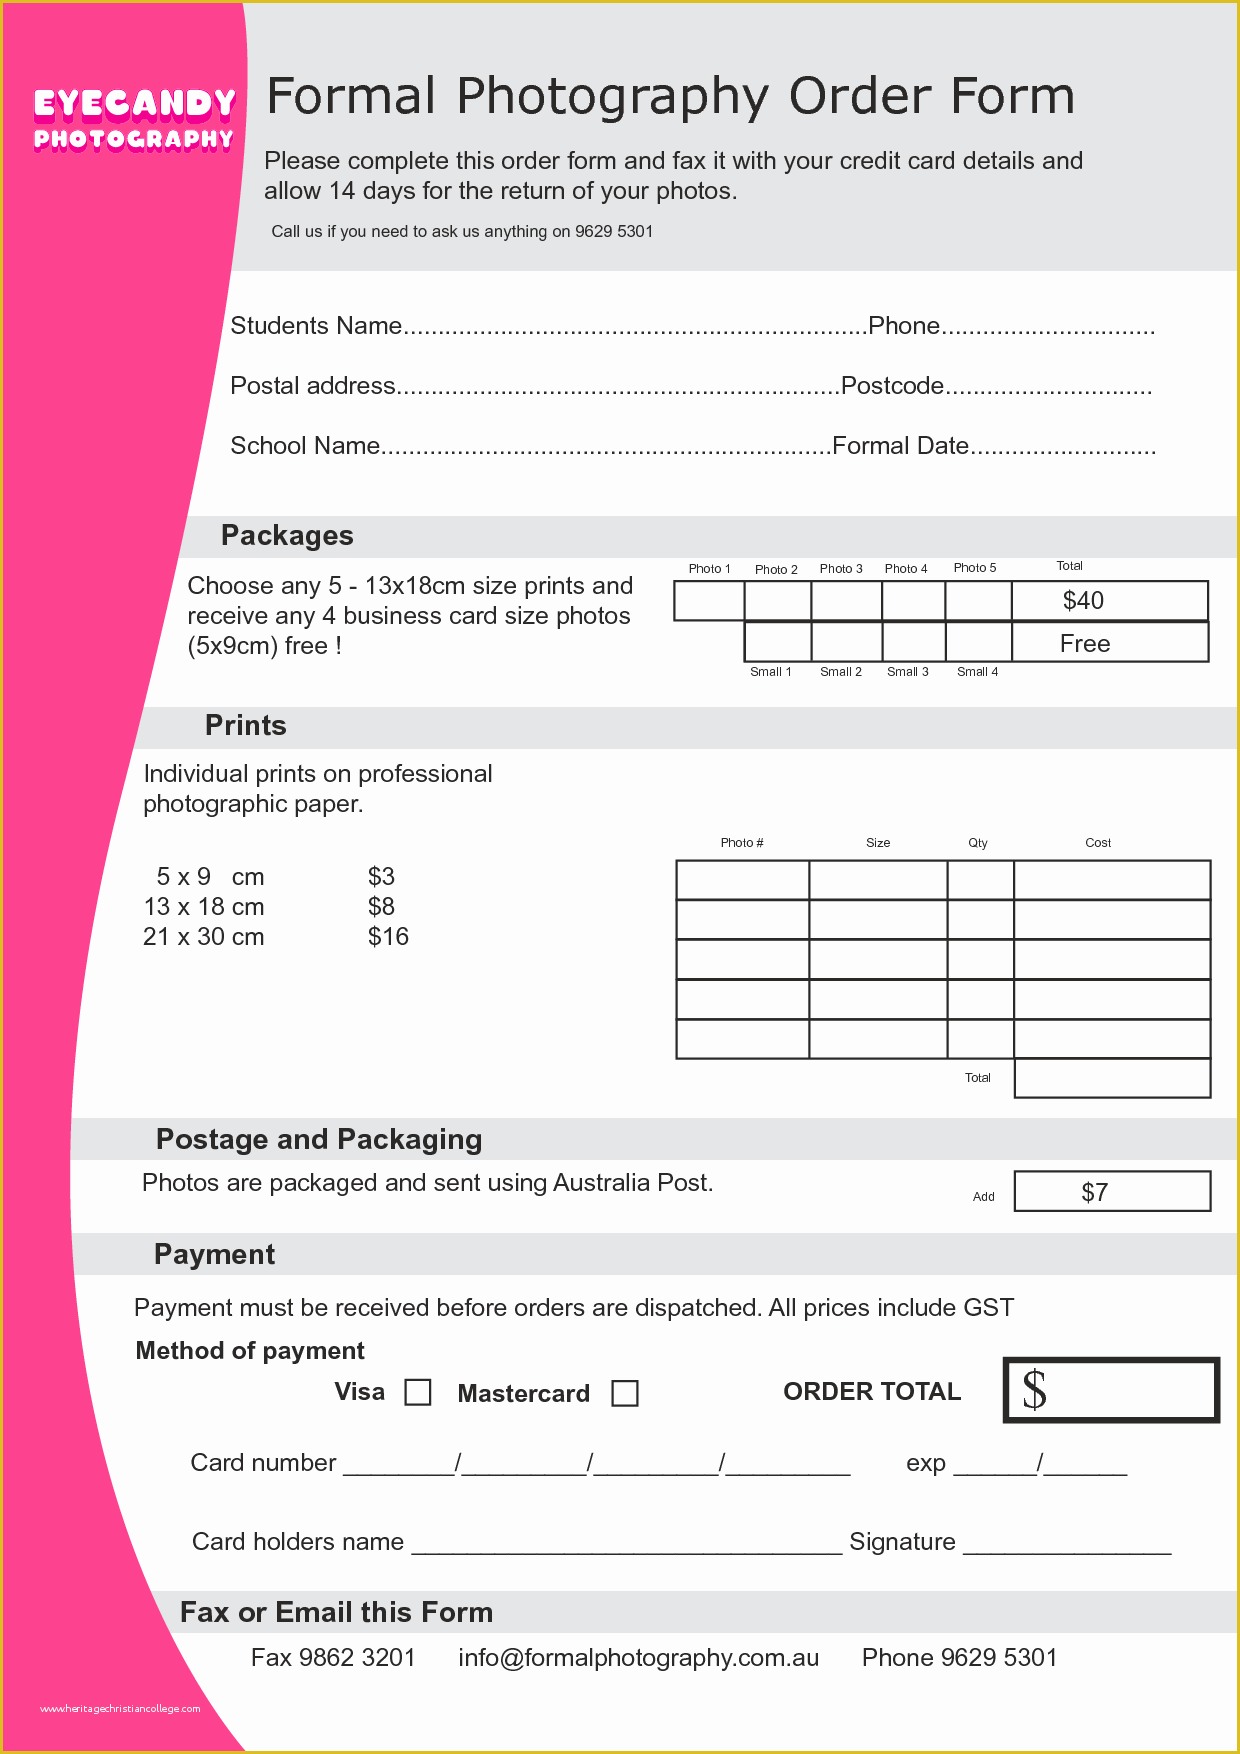 Picture order form Template Free Of School Picture order form Template